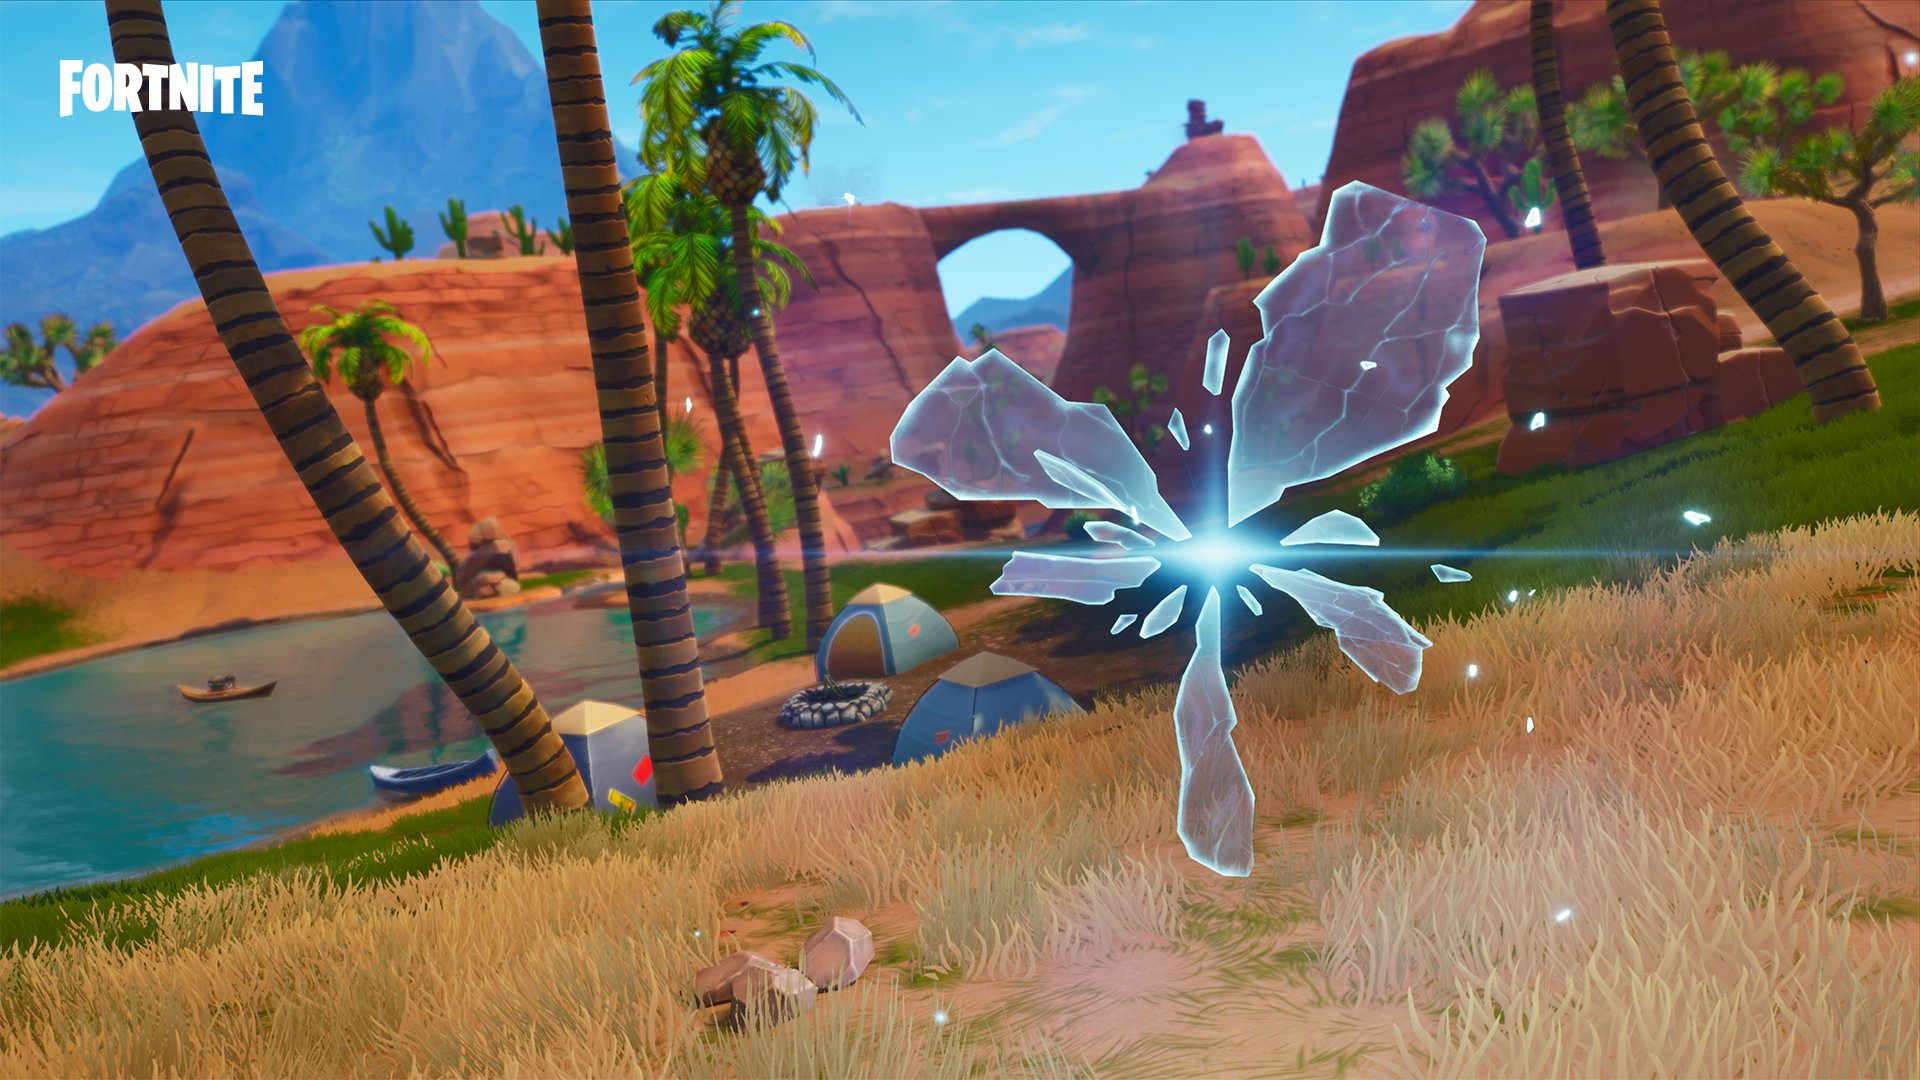 temporal rifts - cool things to build in fortnite save the world